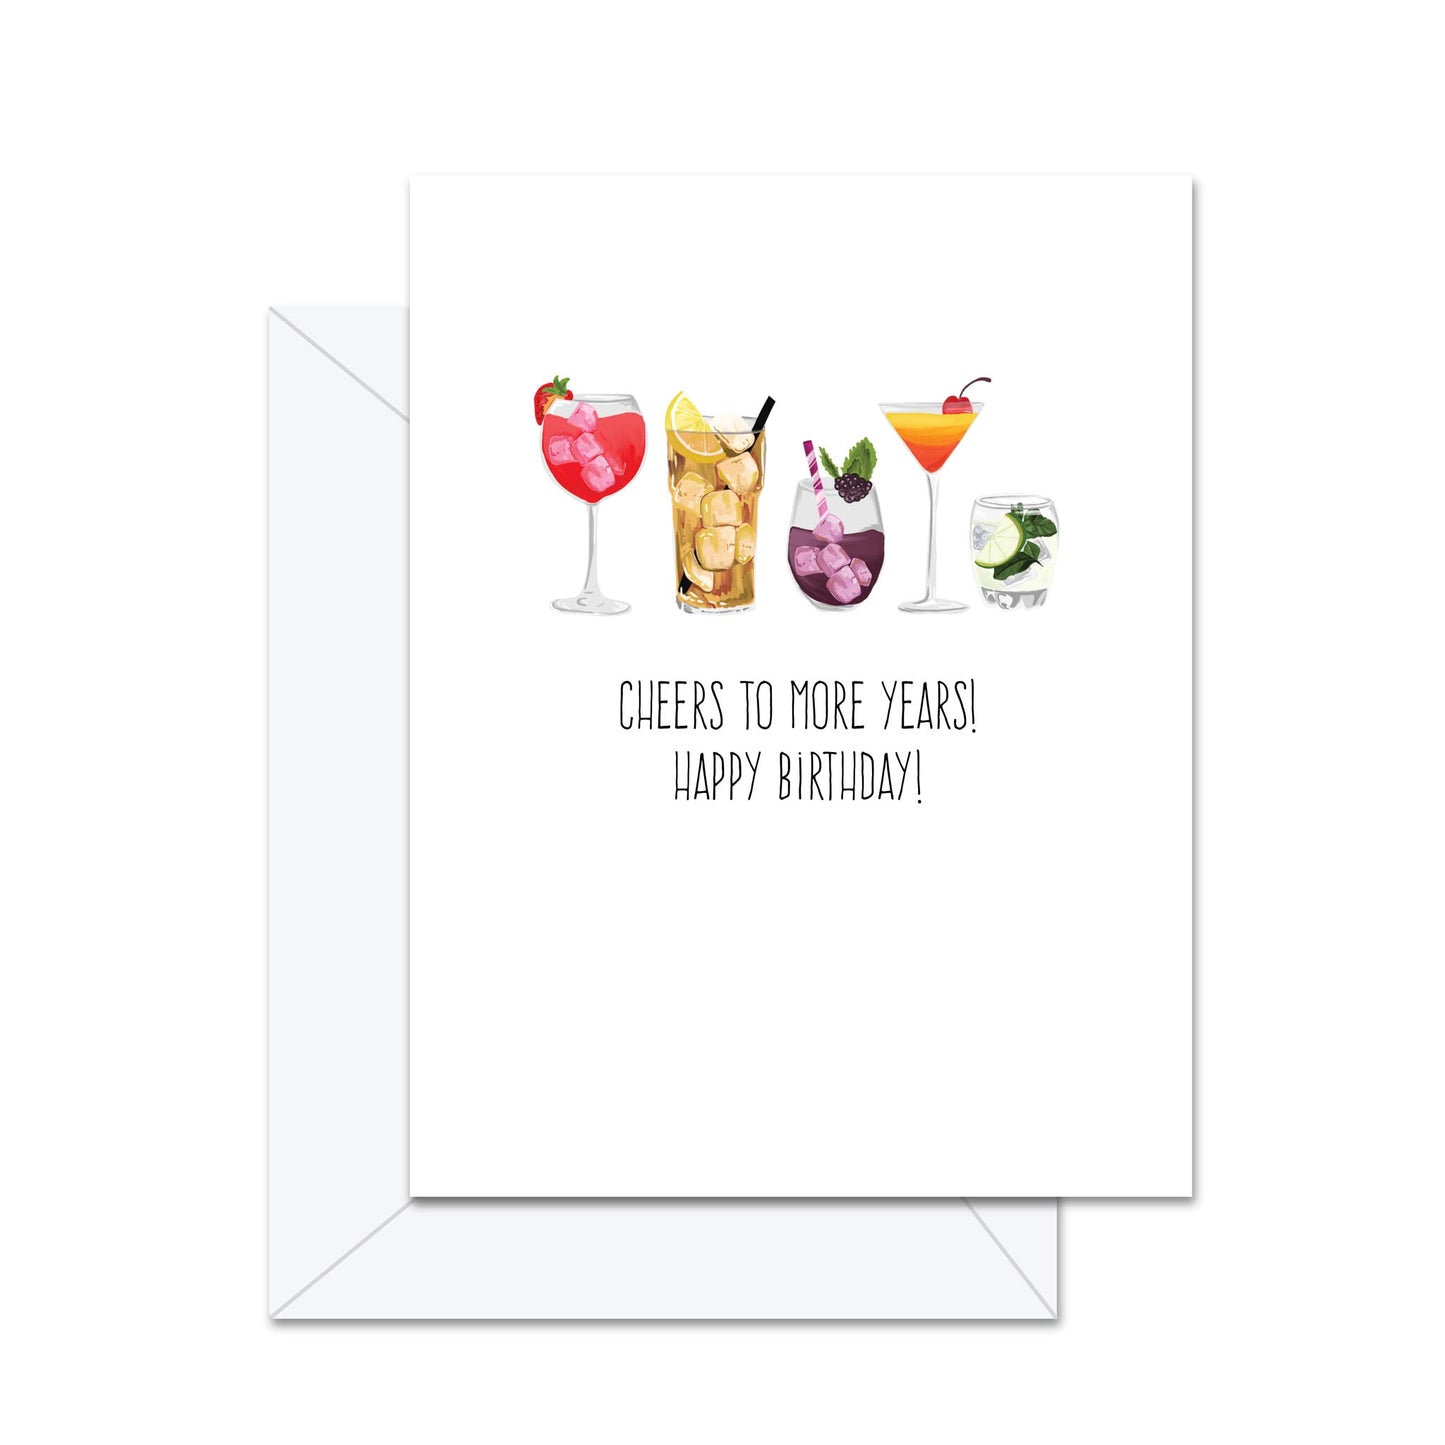 Cheers To More Years! Happy Birthday! - Greeting Card